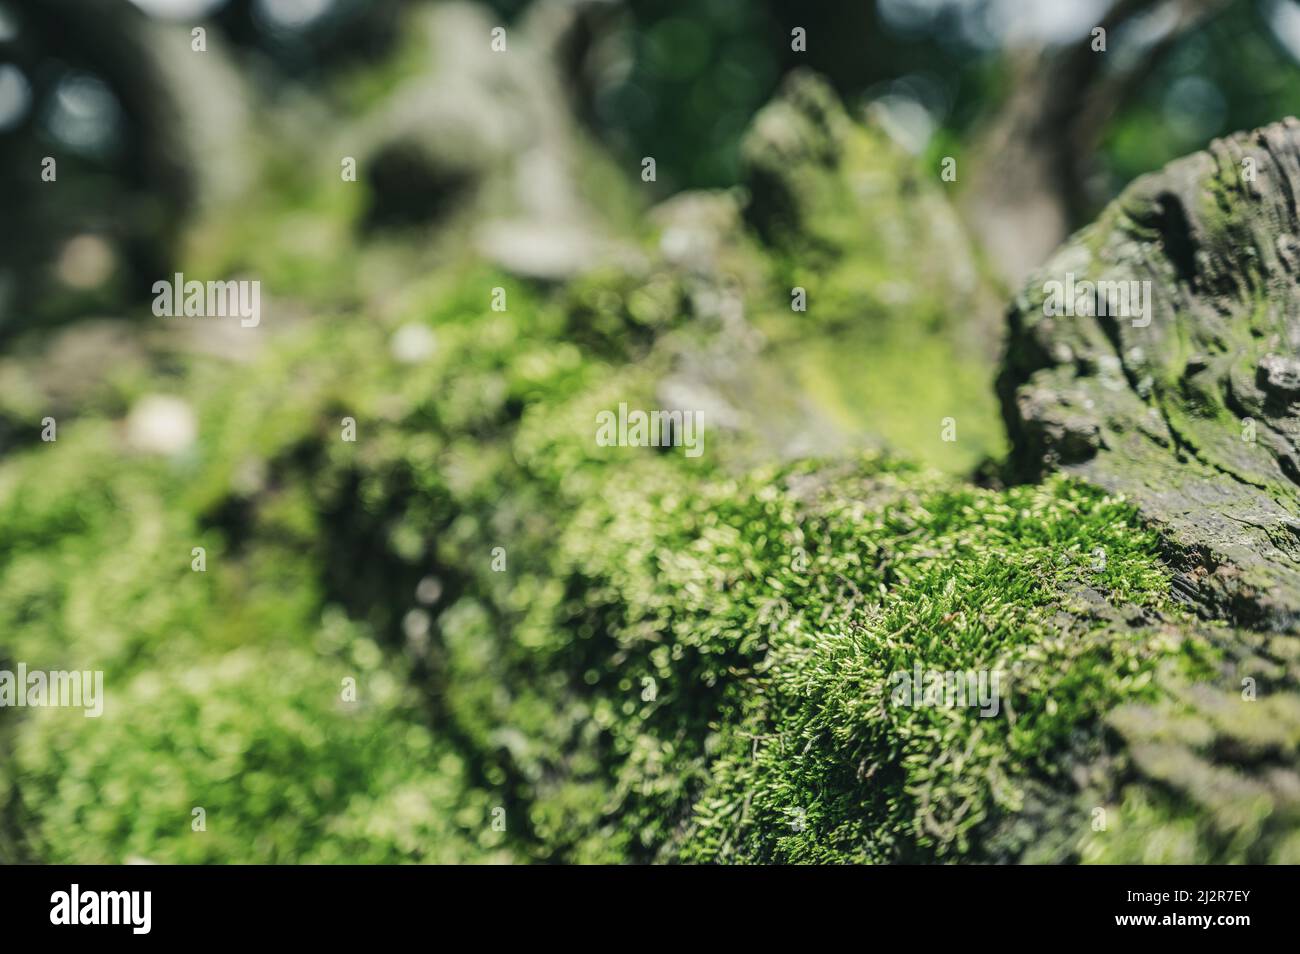 patch of moss showing both gametophytes and sporophytes with a blurred forest backdrop Stock Photo